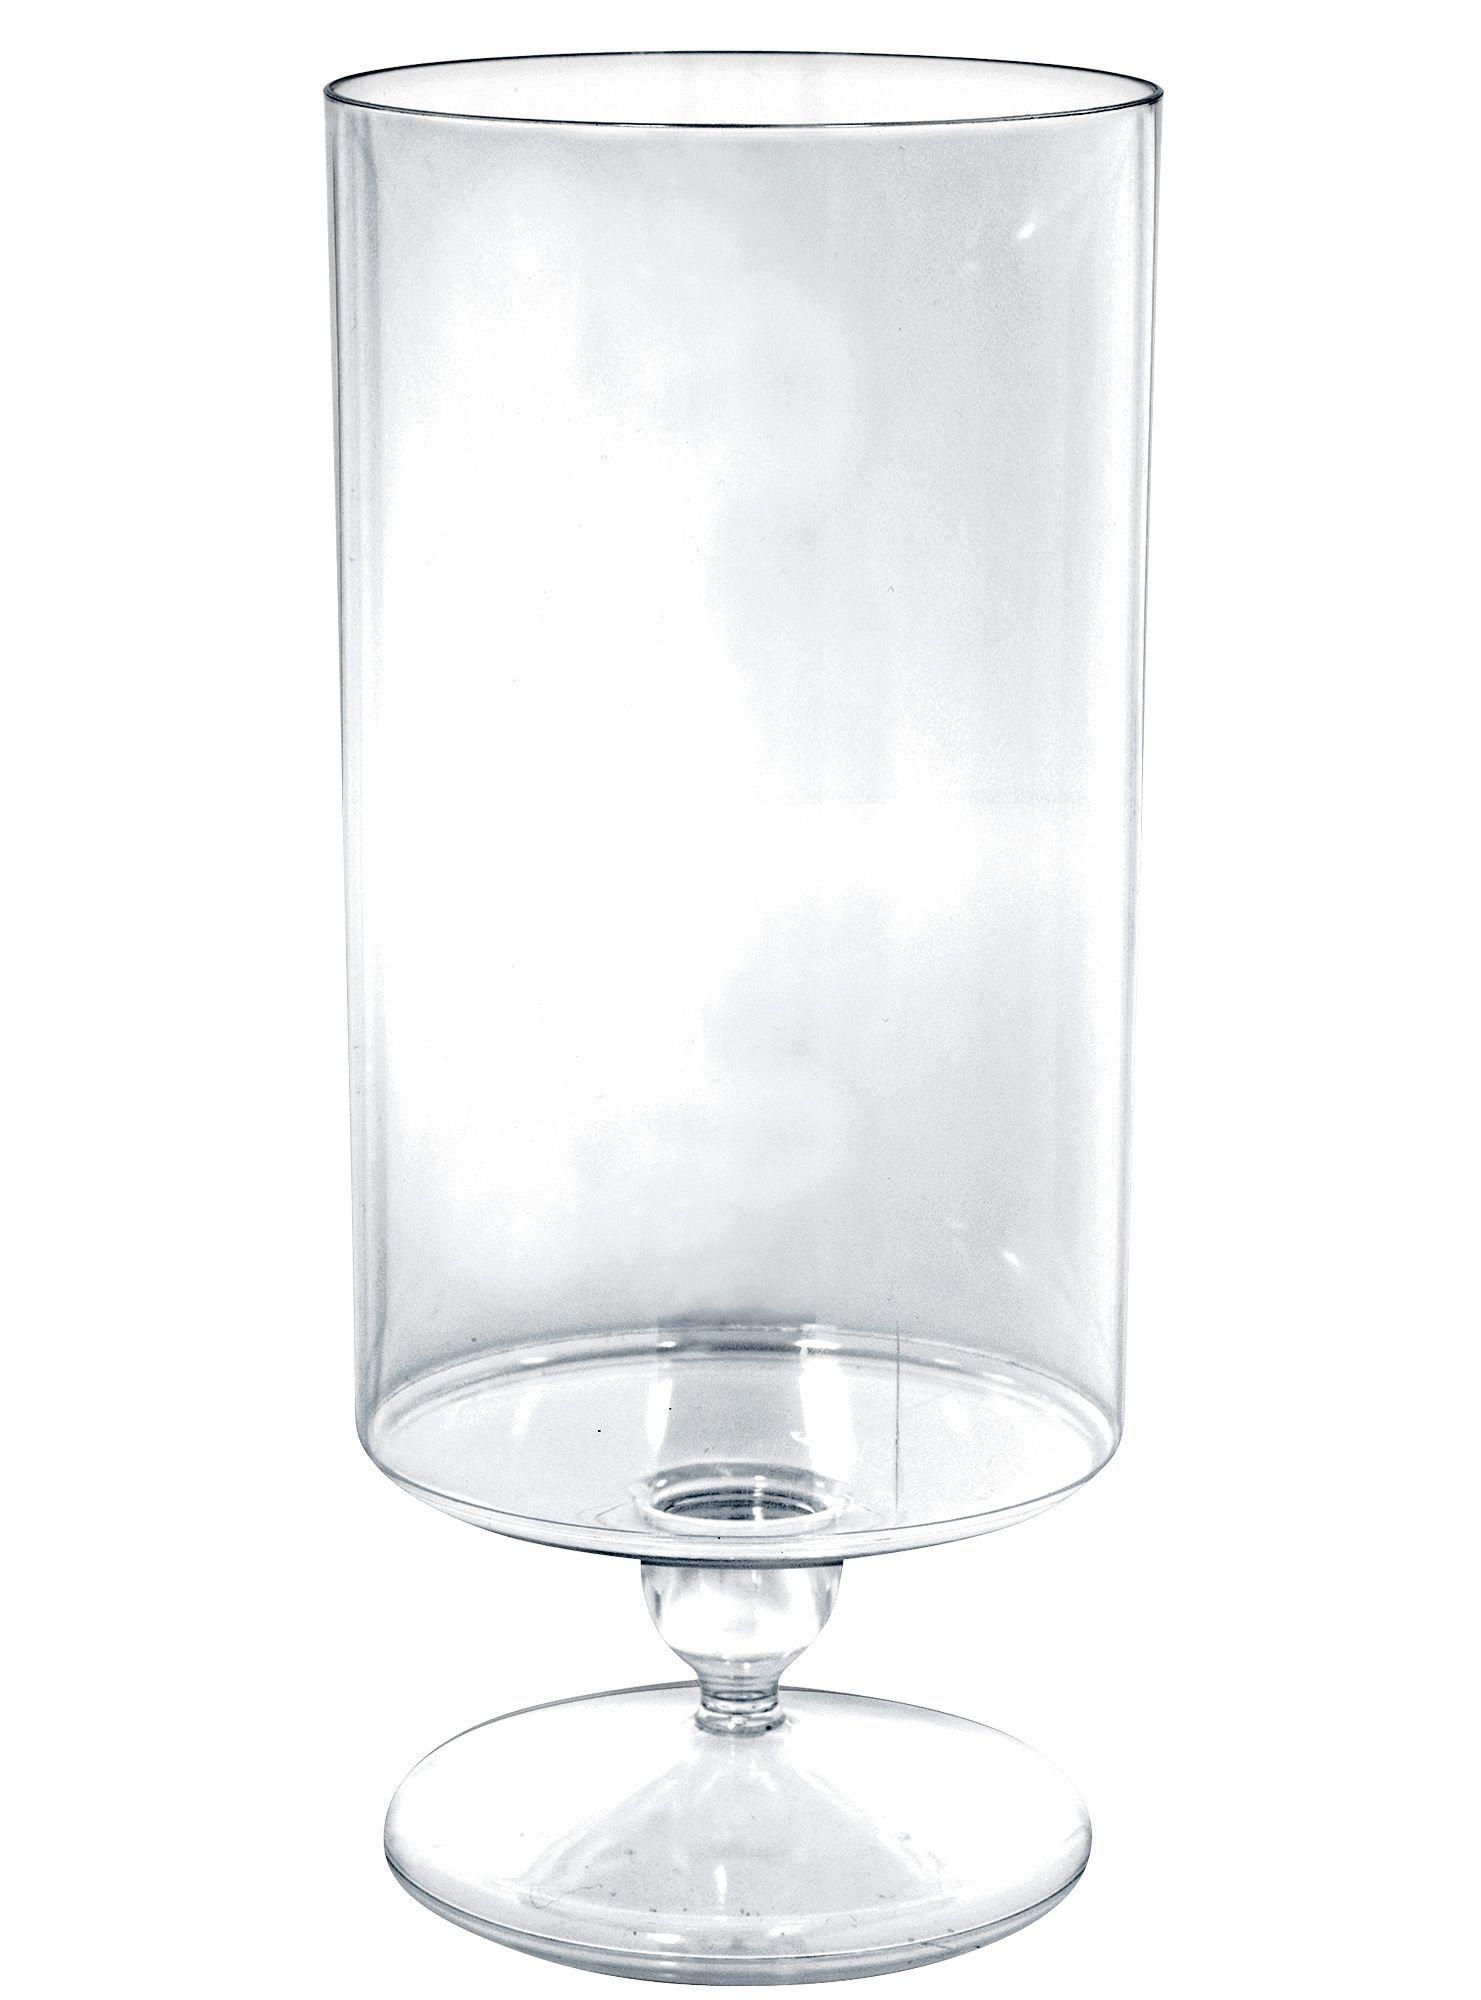 Tall Clear Plastic Pedestal Cylinder Container 83oz